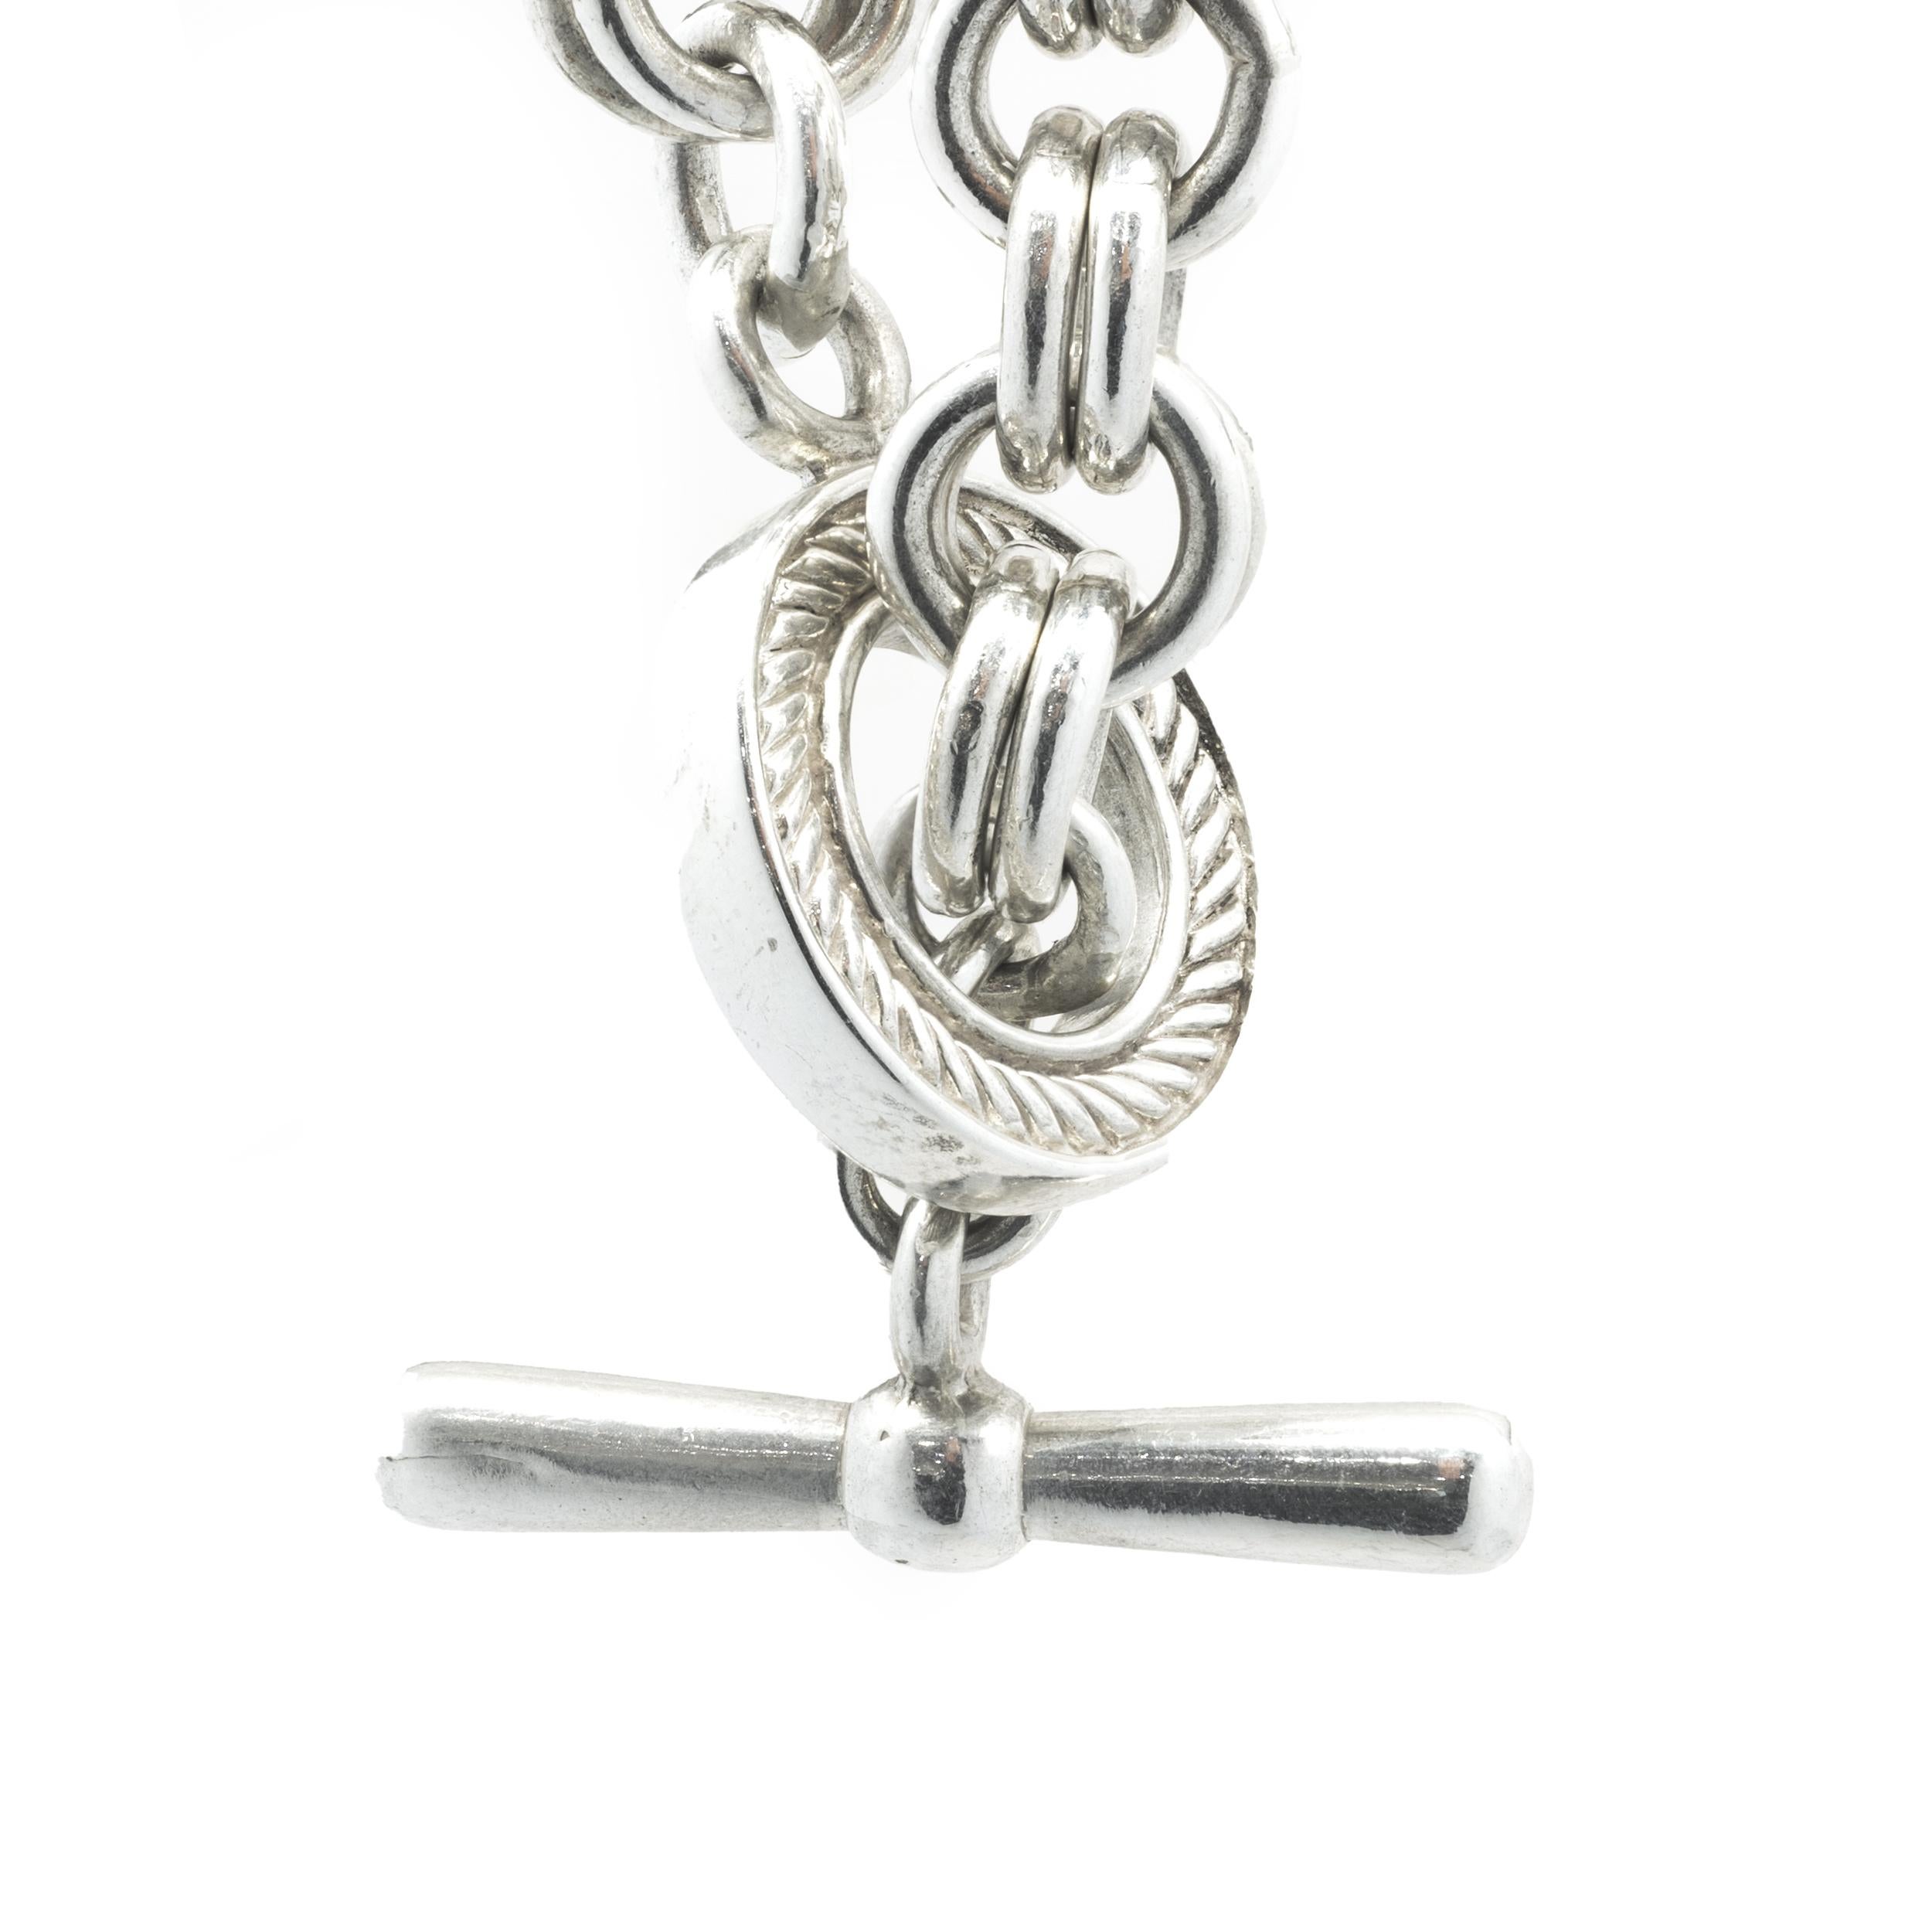 Designer: custom
Material: sterling silver
Dimensions: bracelet measures 9-inches in length
Weight: 77.13 grams
